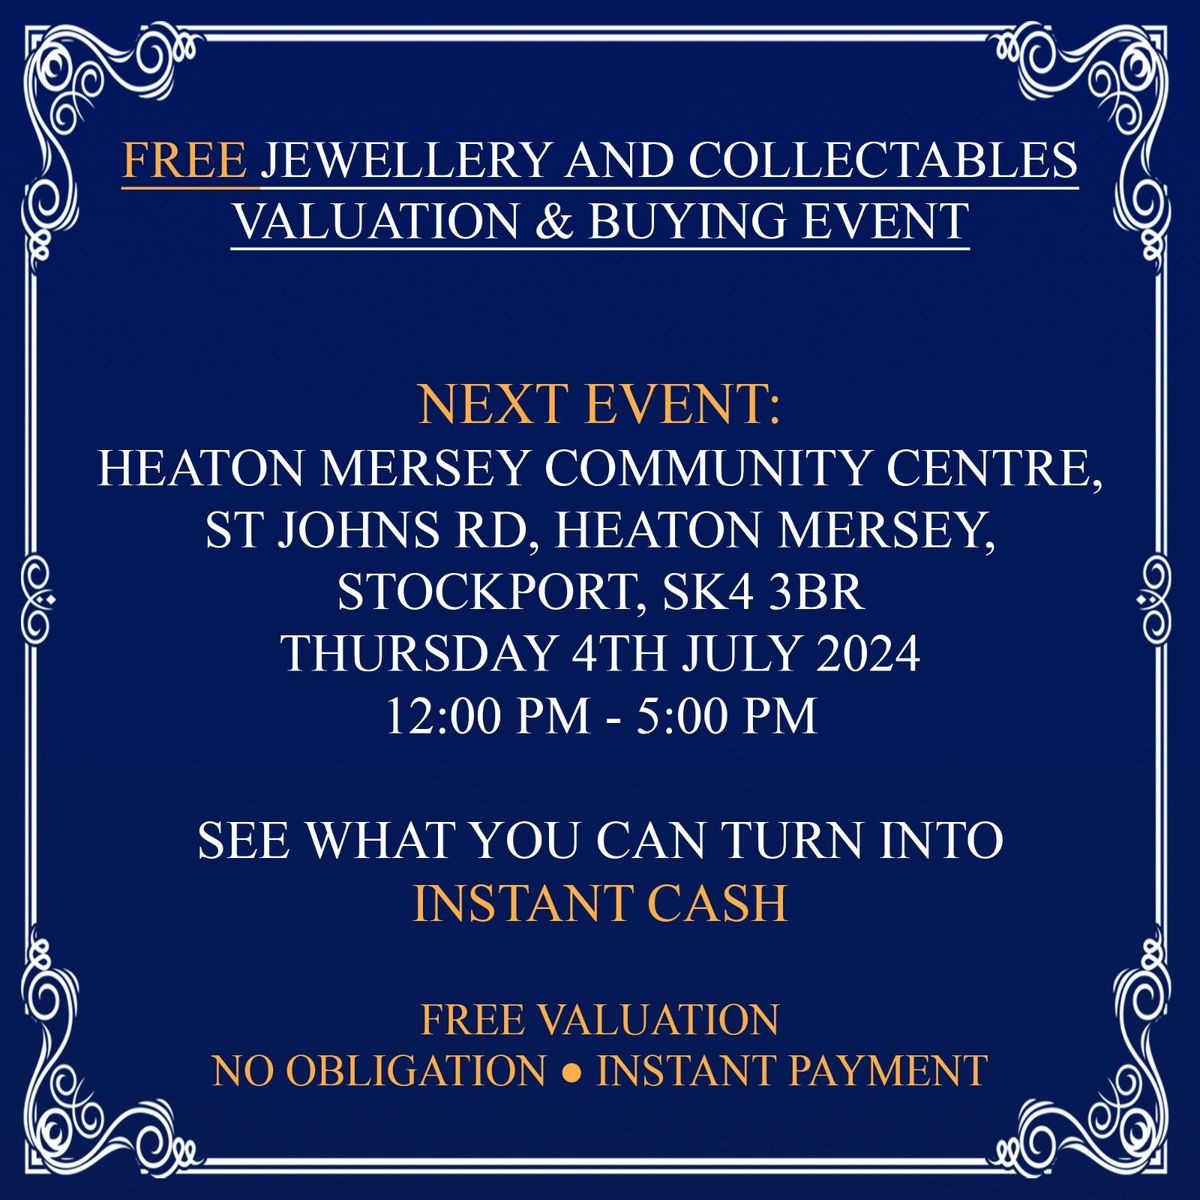 Heaton Mersey antiques valuation & buying event 